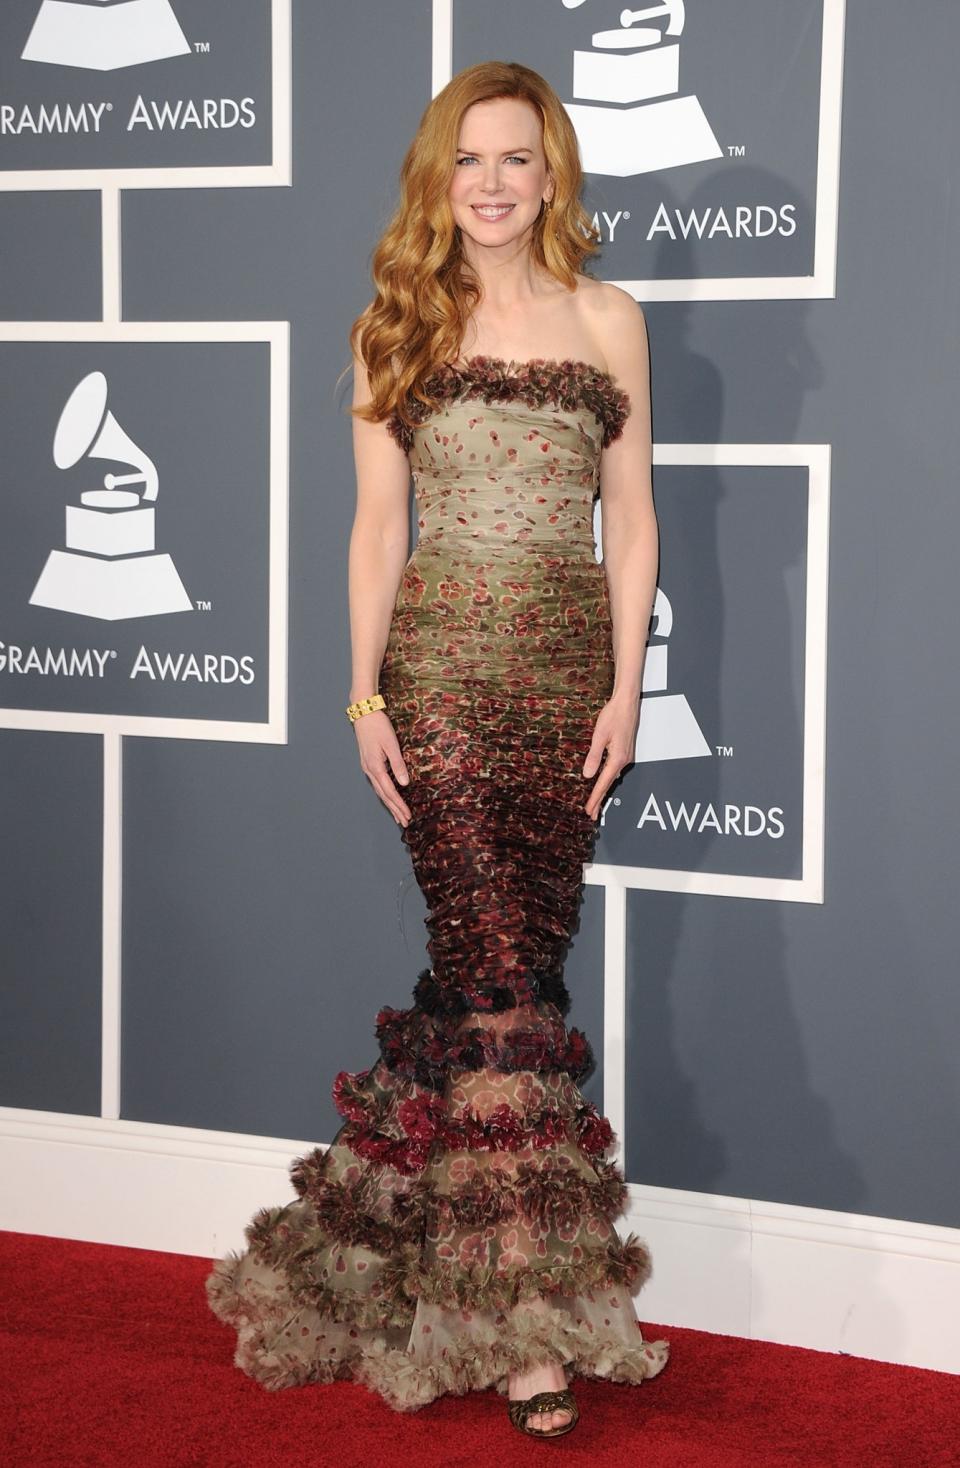 Wearing Jean Paul Gaultier to the 53rd Annual Grammy Awards